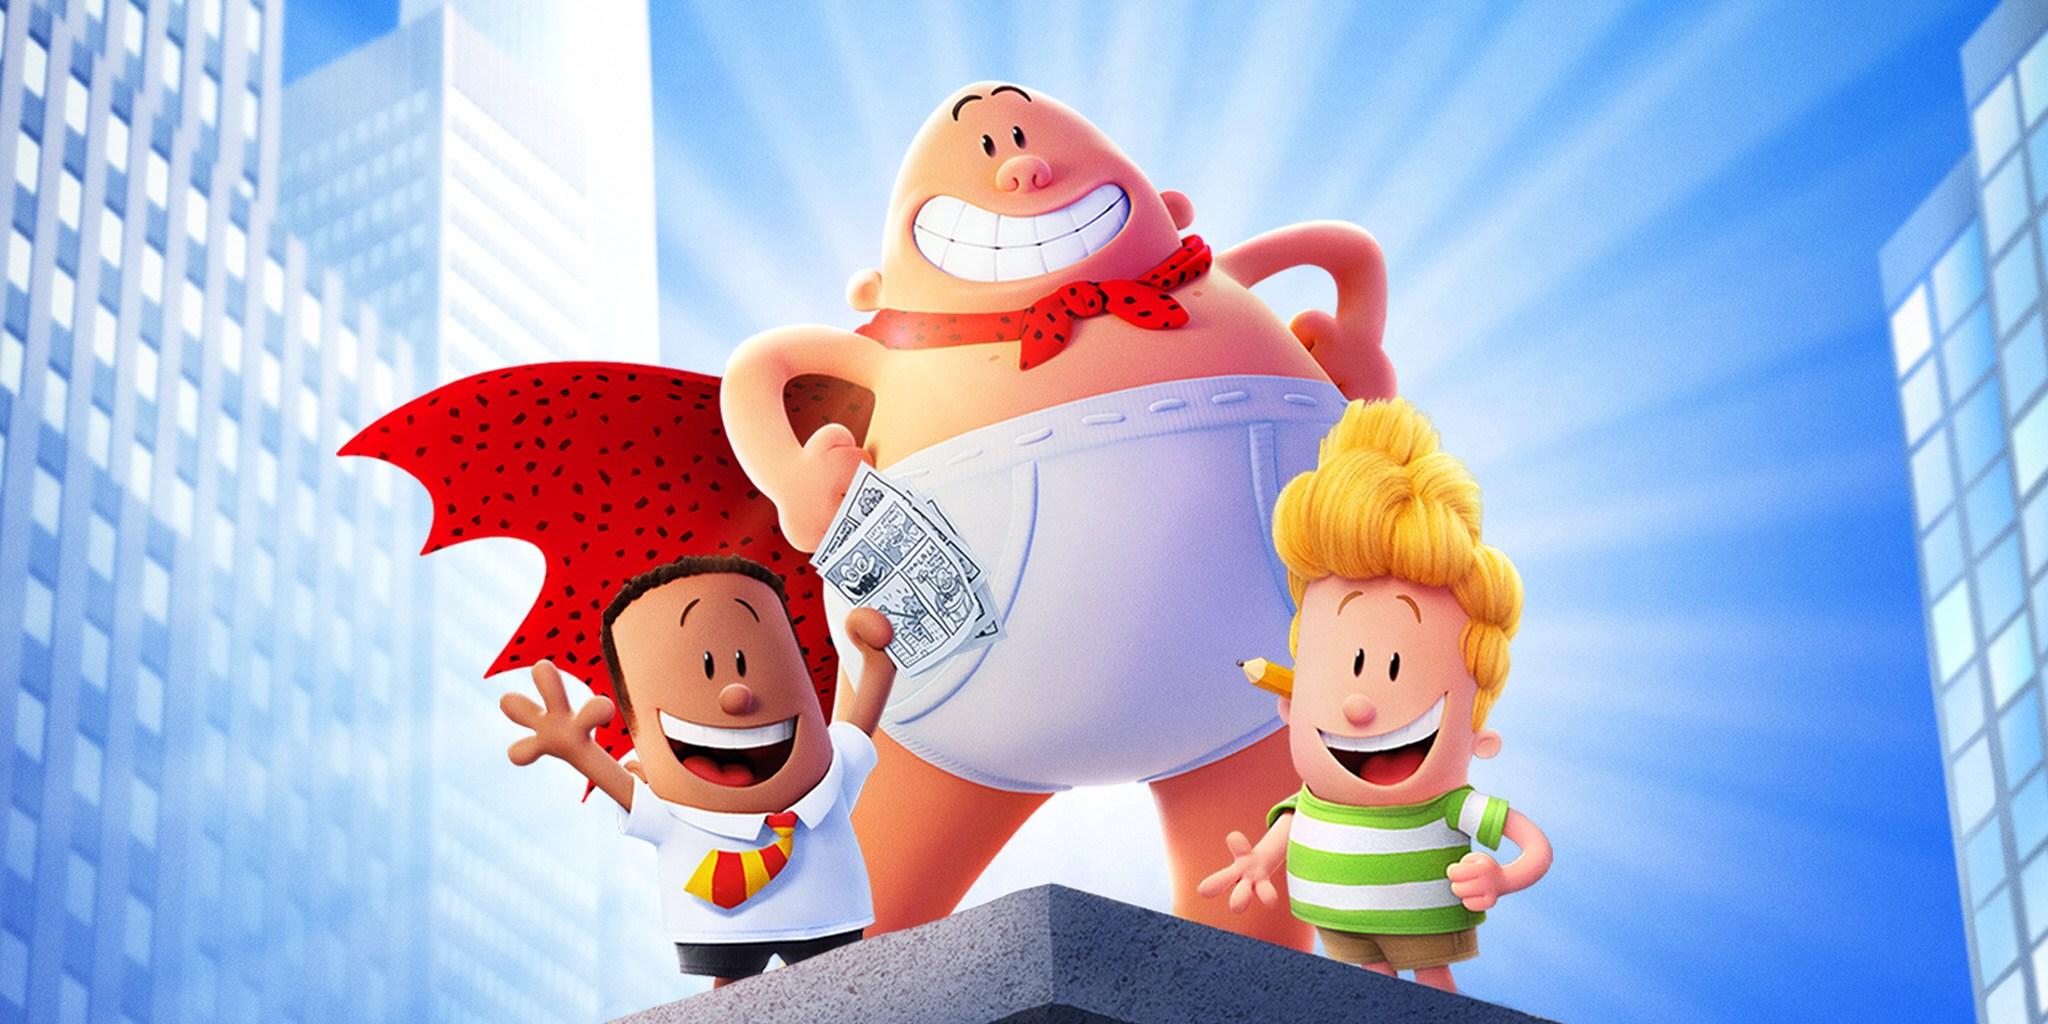 Movies in the Park “Captain Underpants”